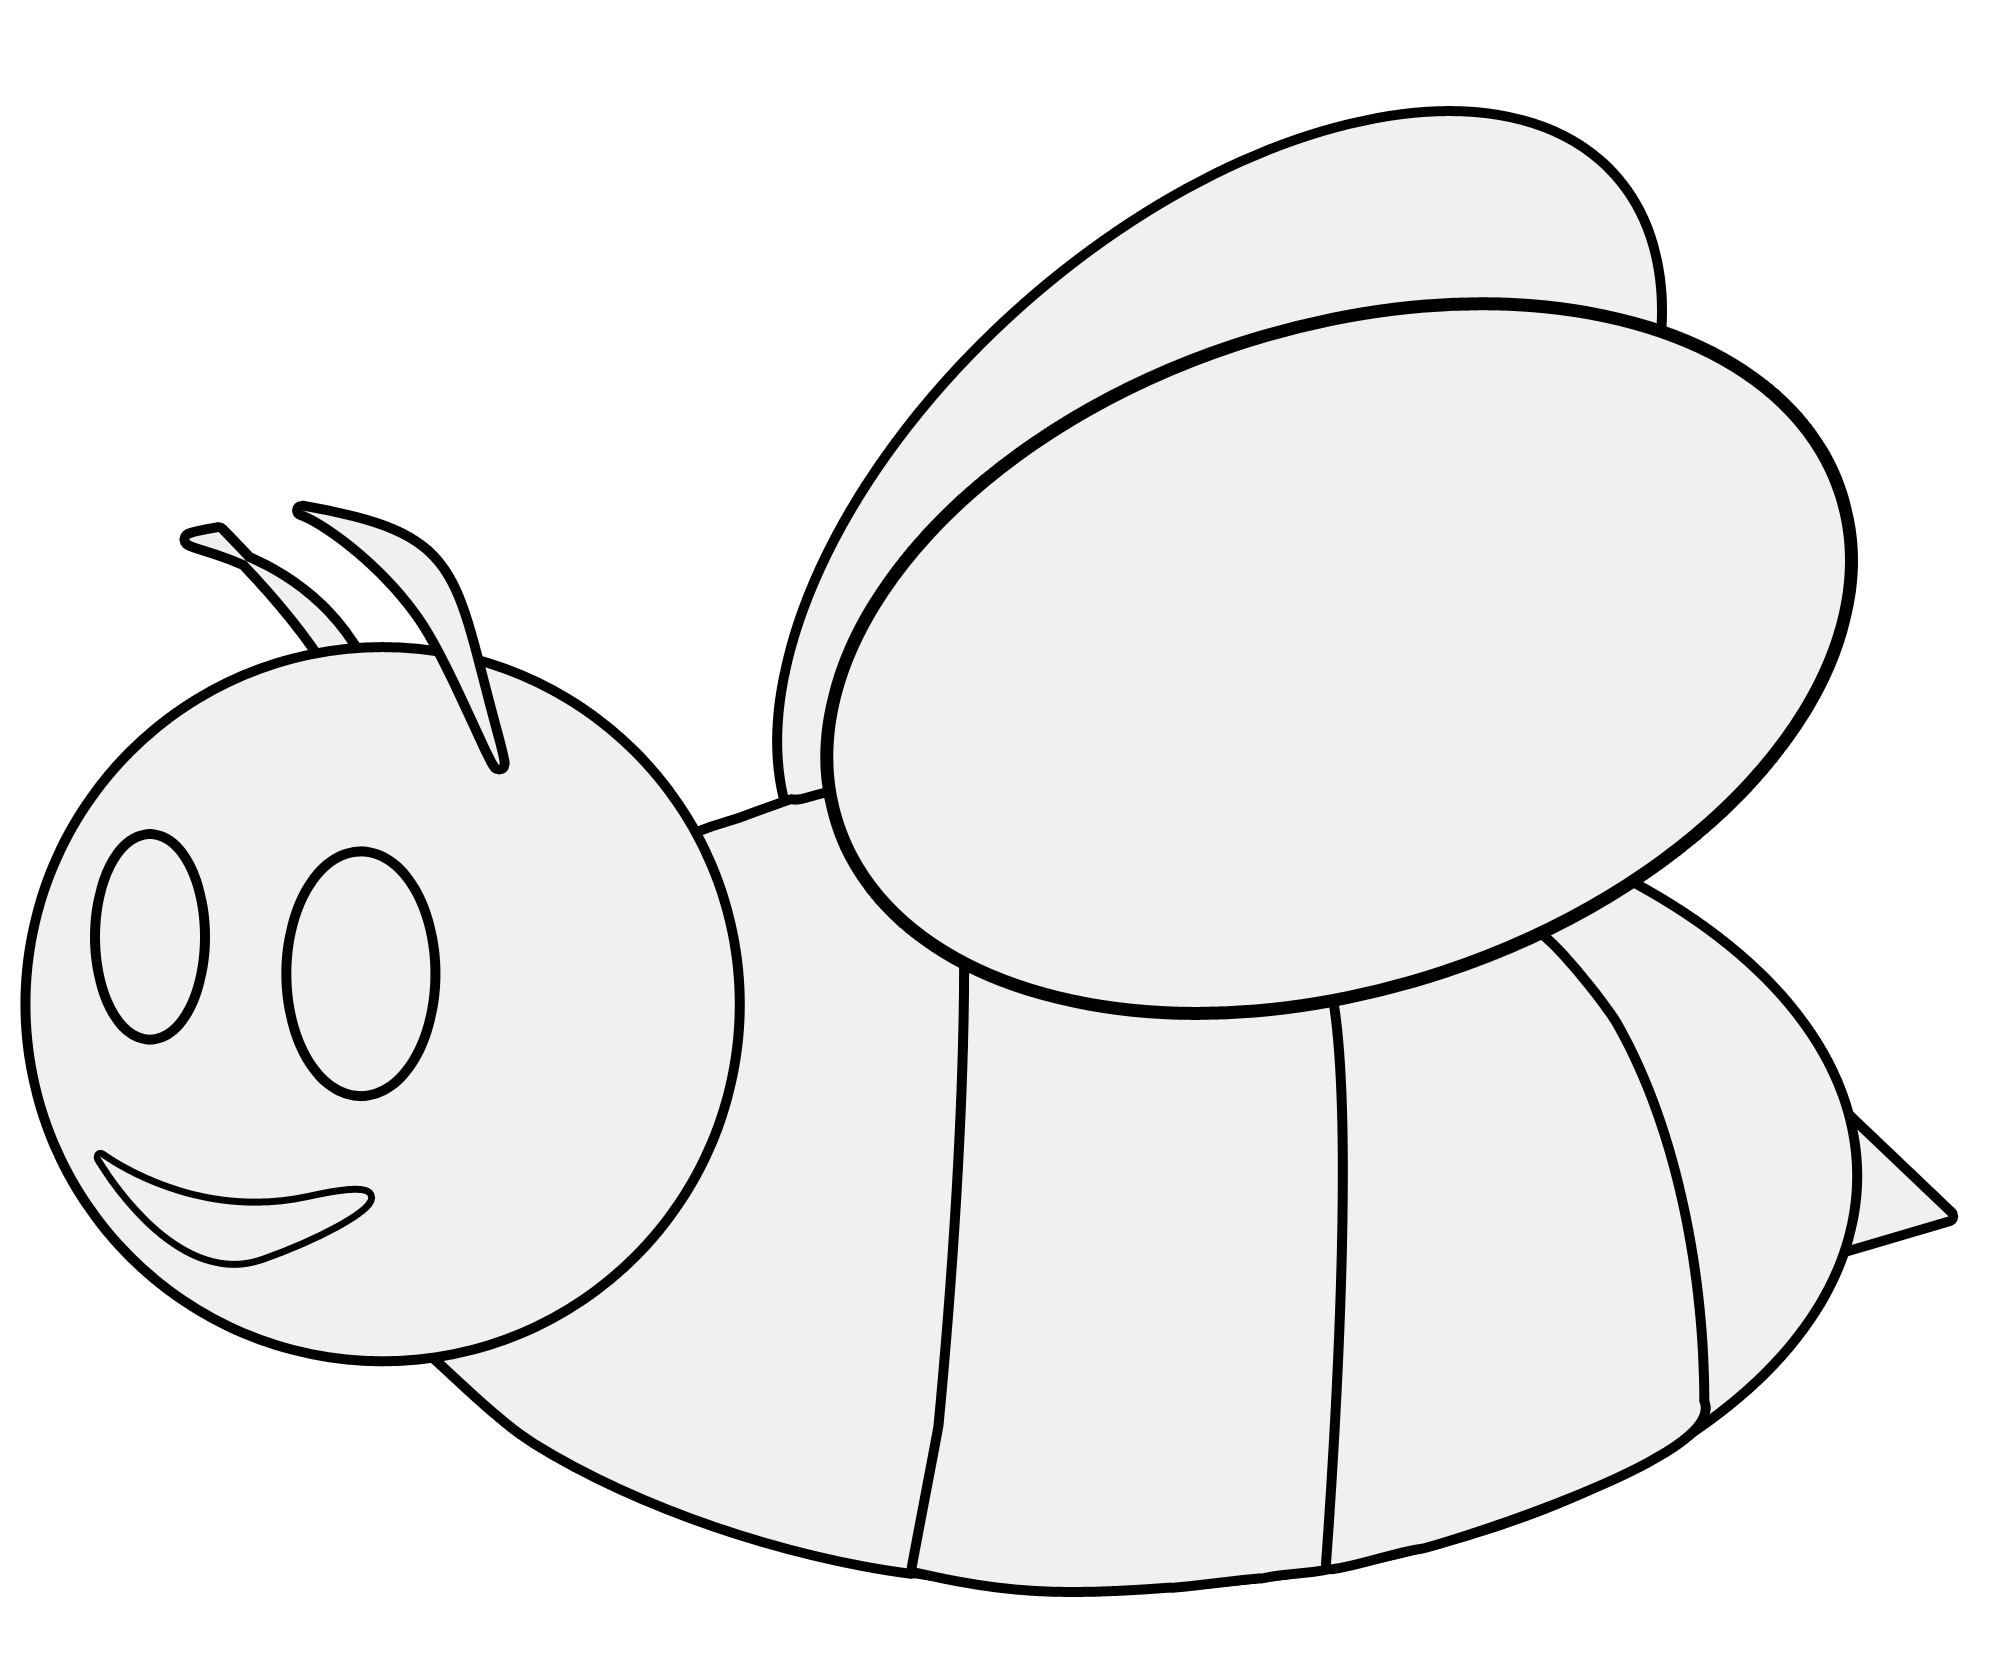 bumble bee coloring pages printable cute bumble bee coloring pages download and print for free pages bumble bee printable coloring 